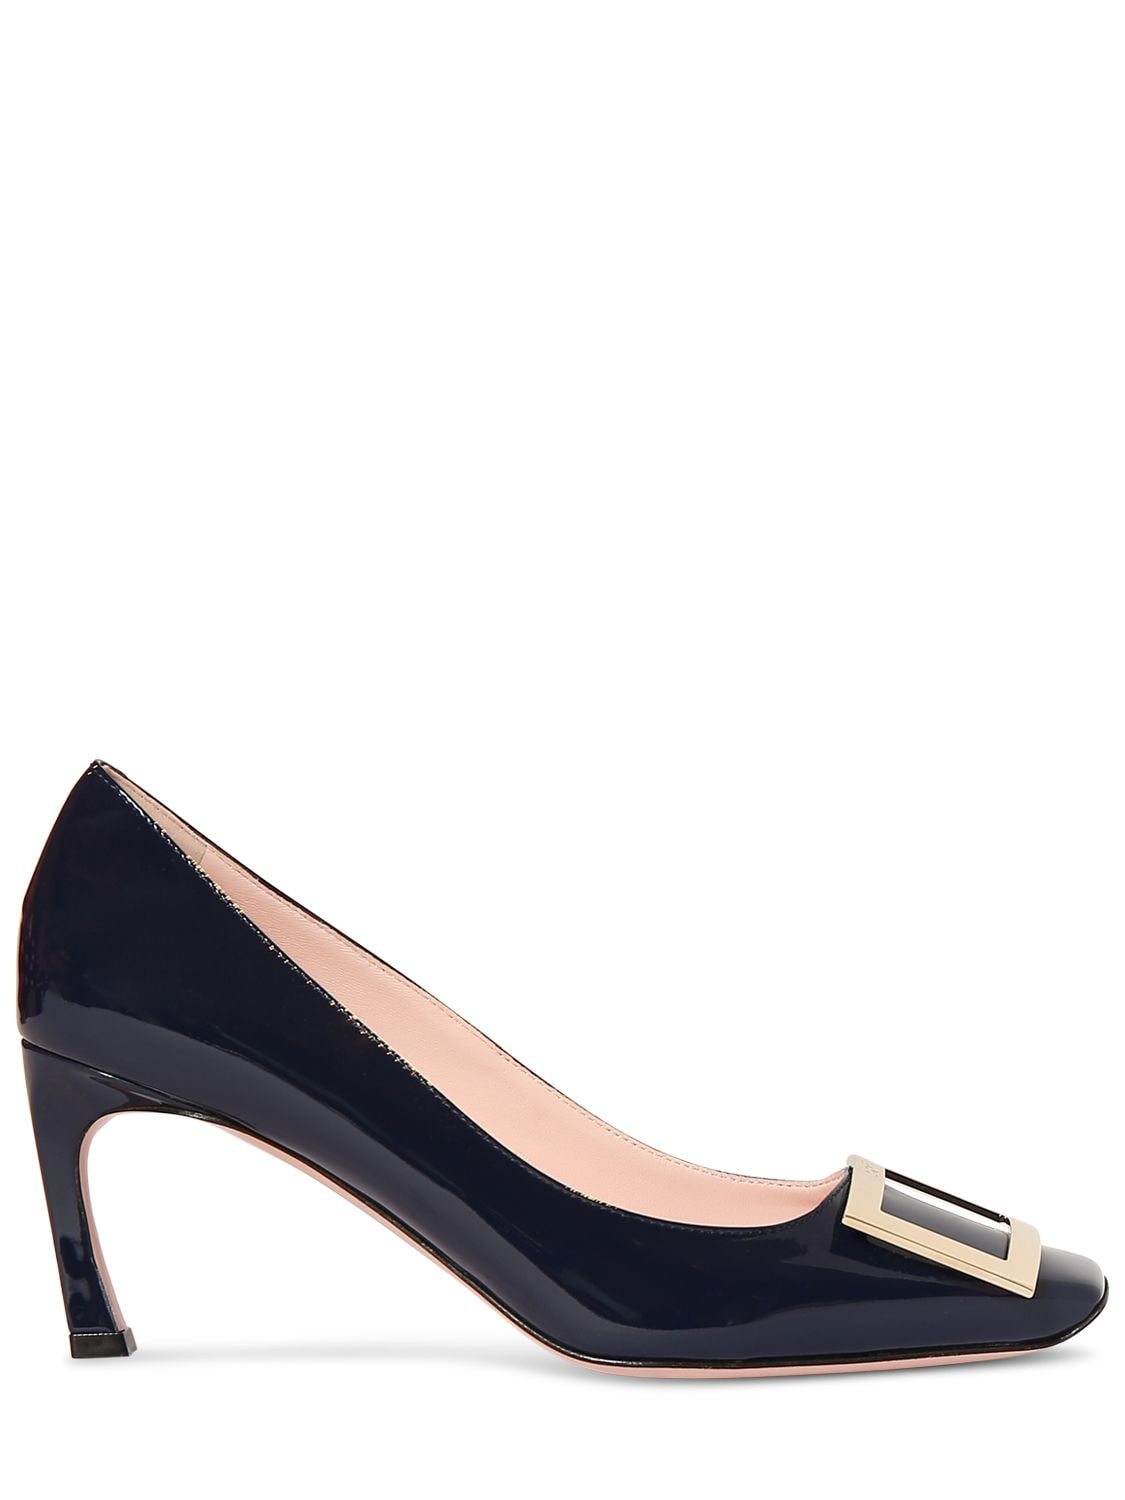 Roger Vivier 70mm Trompette Patent Leather Pumps In Navy